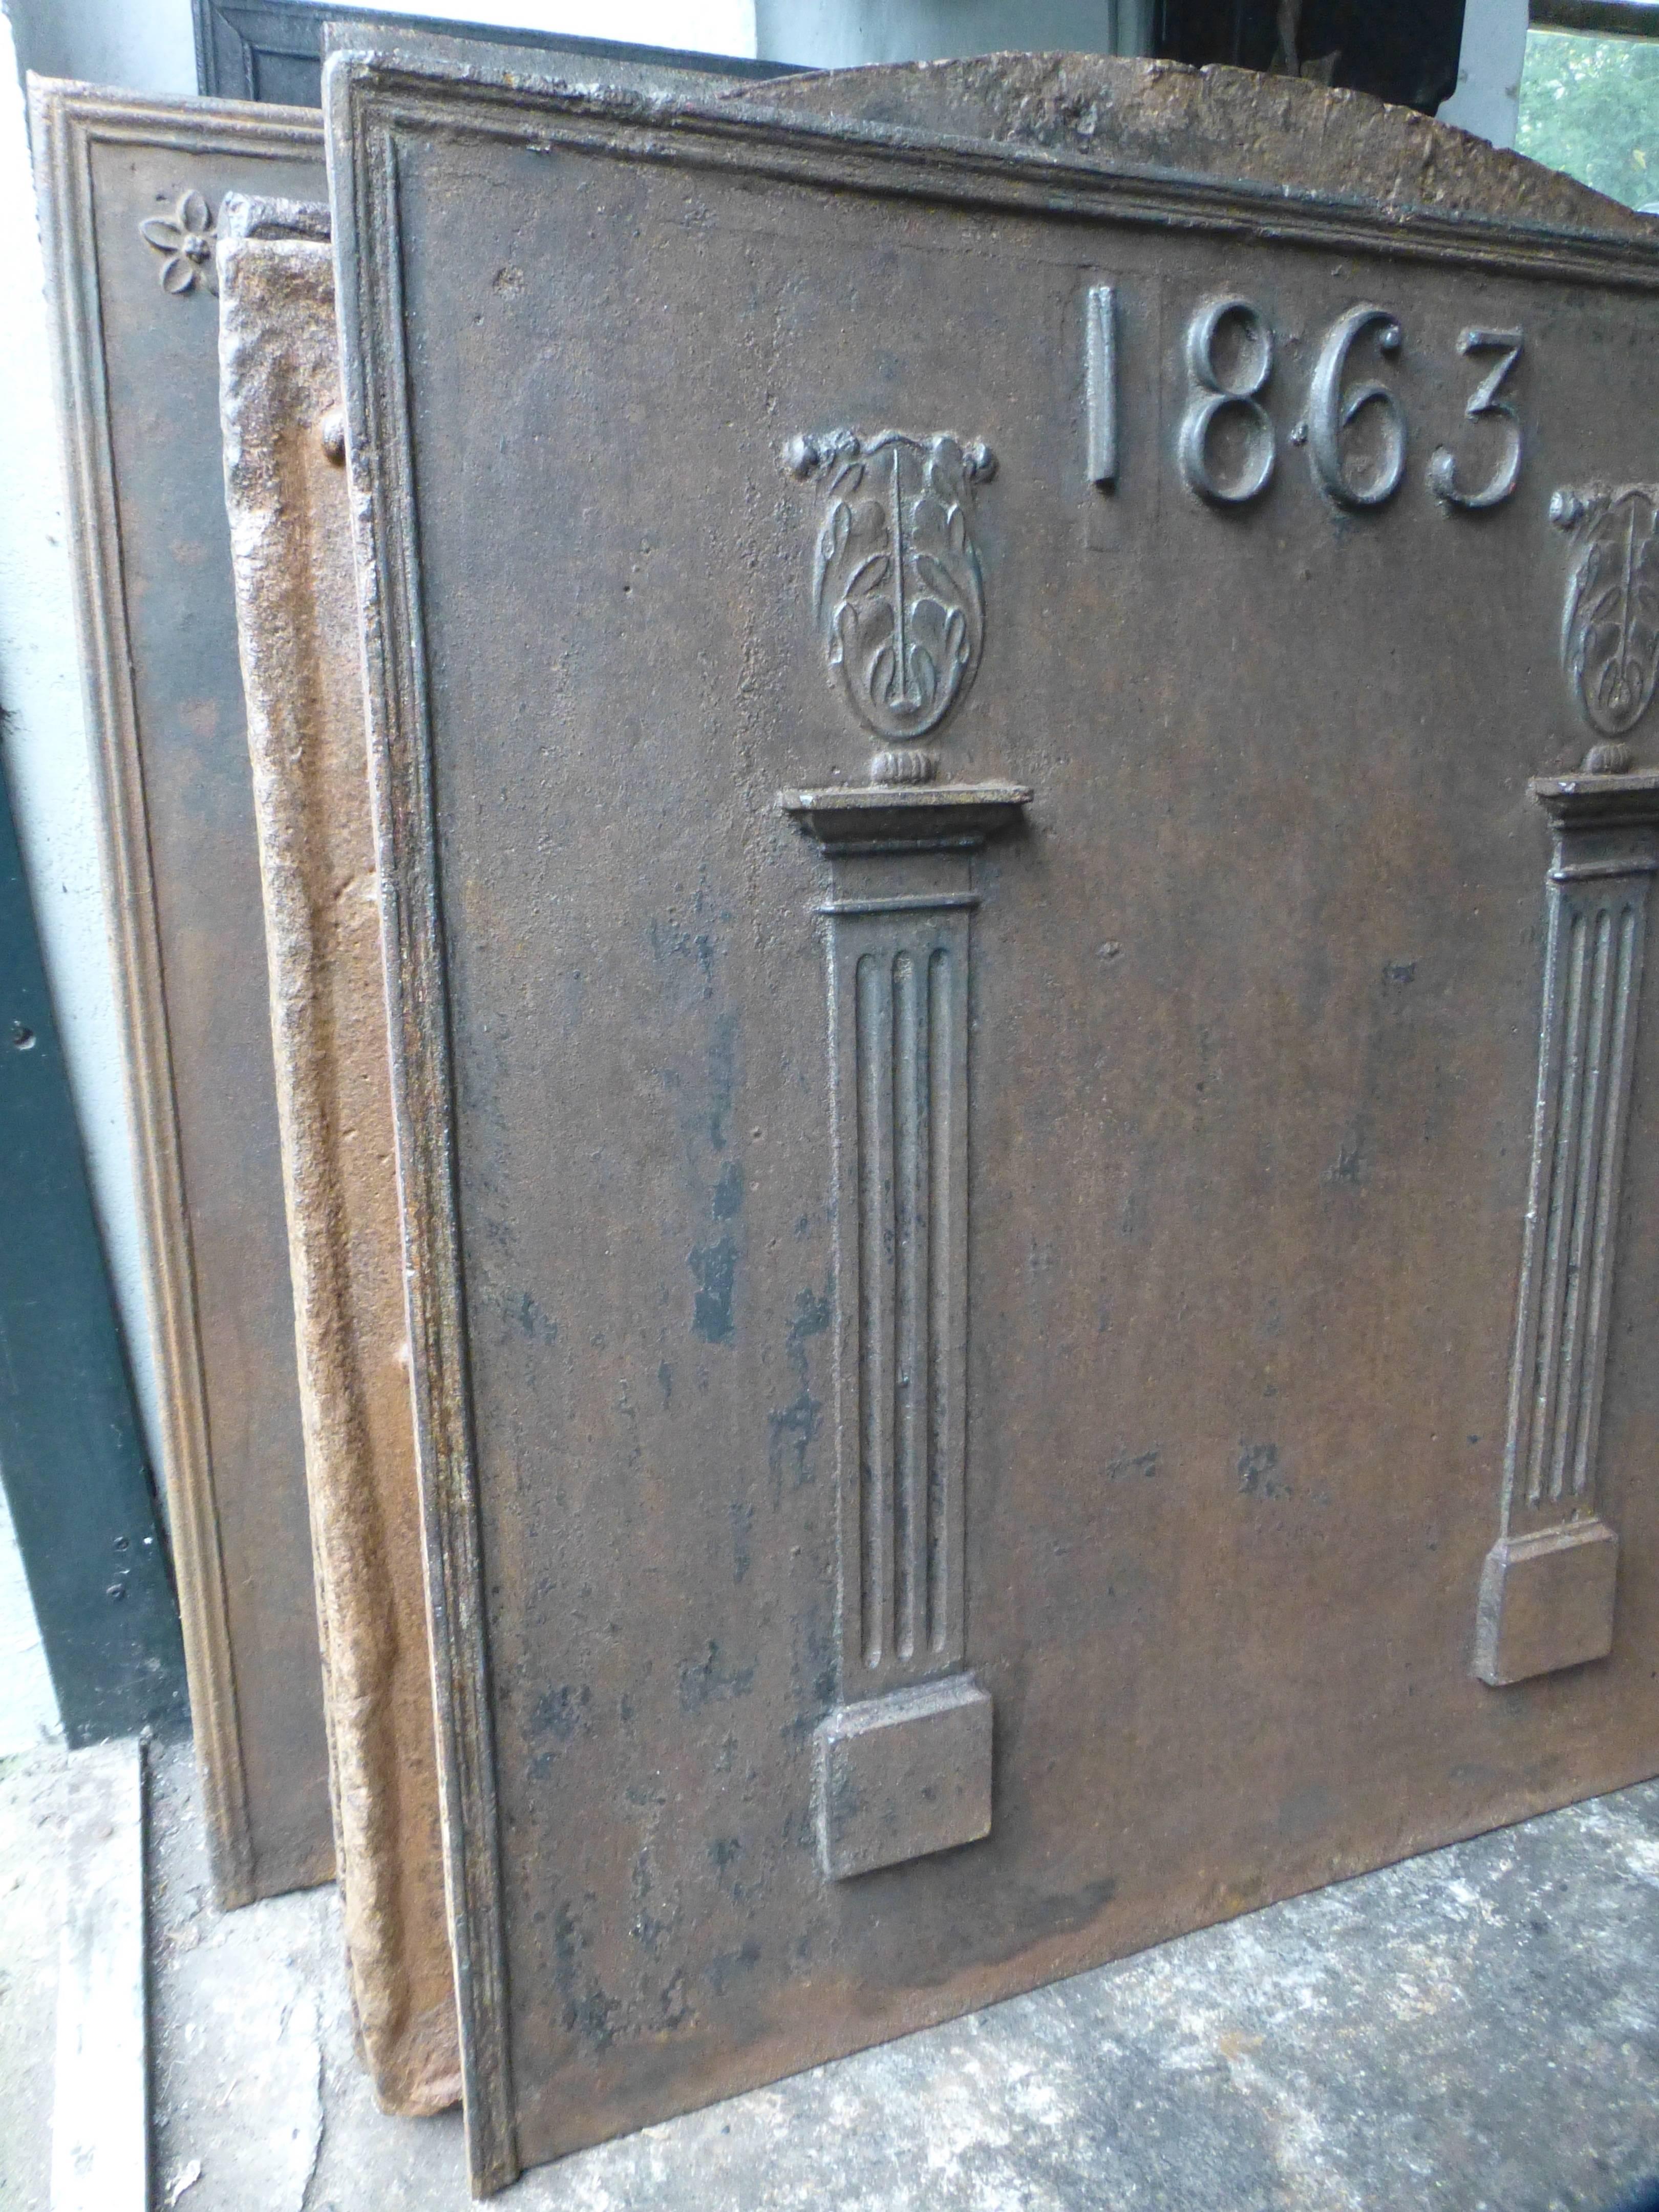 French fireback with pillars and the date of production 1863.

This product weighs more than 65 kg / 143 lbs. All our products that weigh 66 kg / 146 lbs or more are shipped as standard door-to-door freight. You can contact us to find out the daily